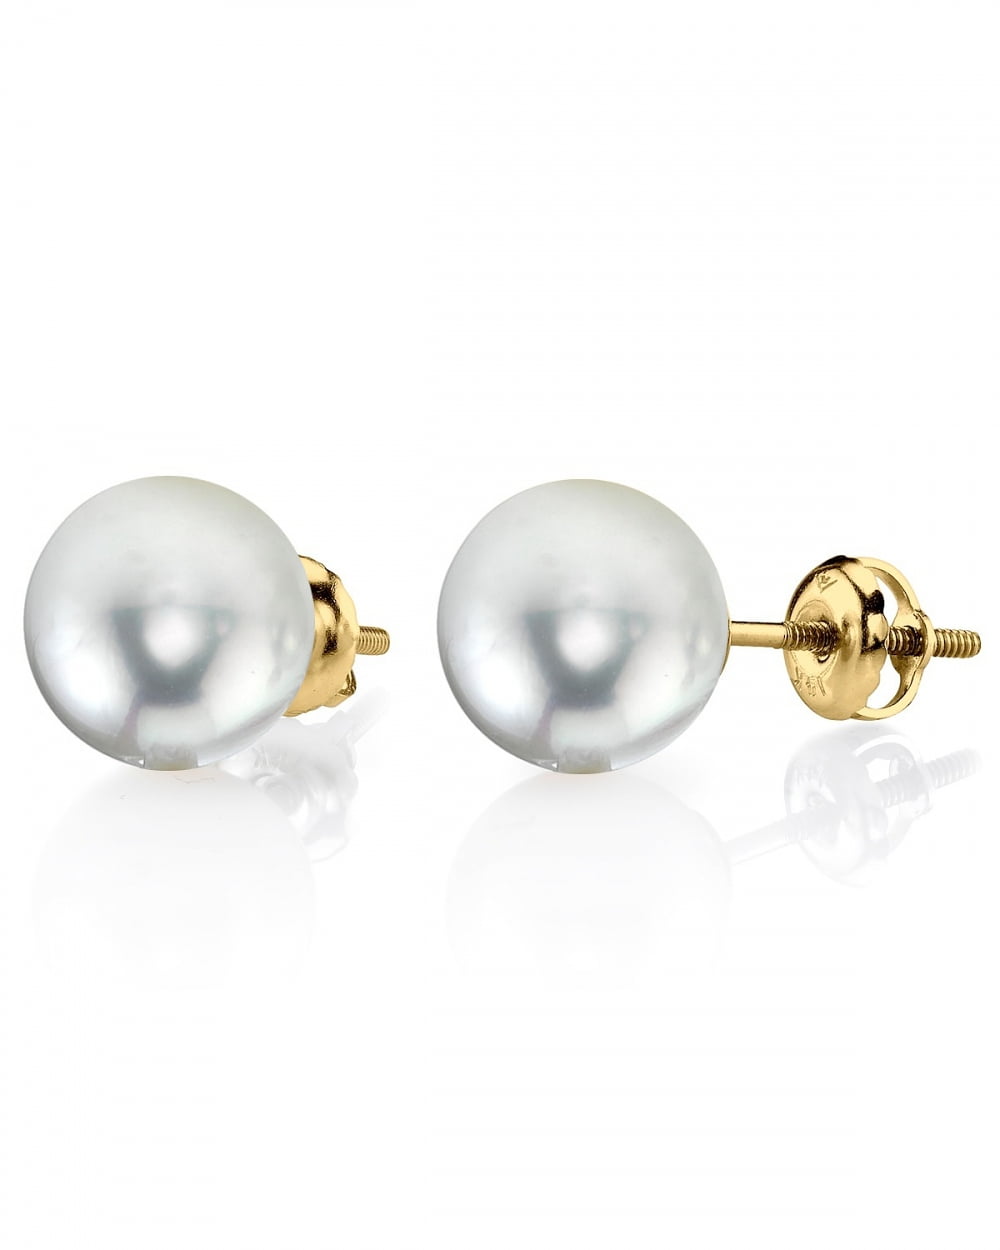 14KT Details about   Match 6mm TOP Grade Perfect Round White Akoya pearls Stud earring 18KT 